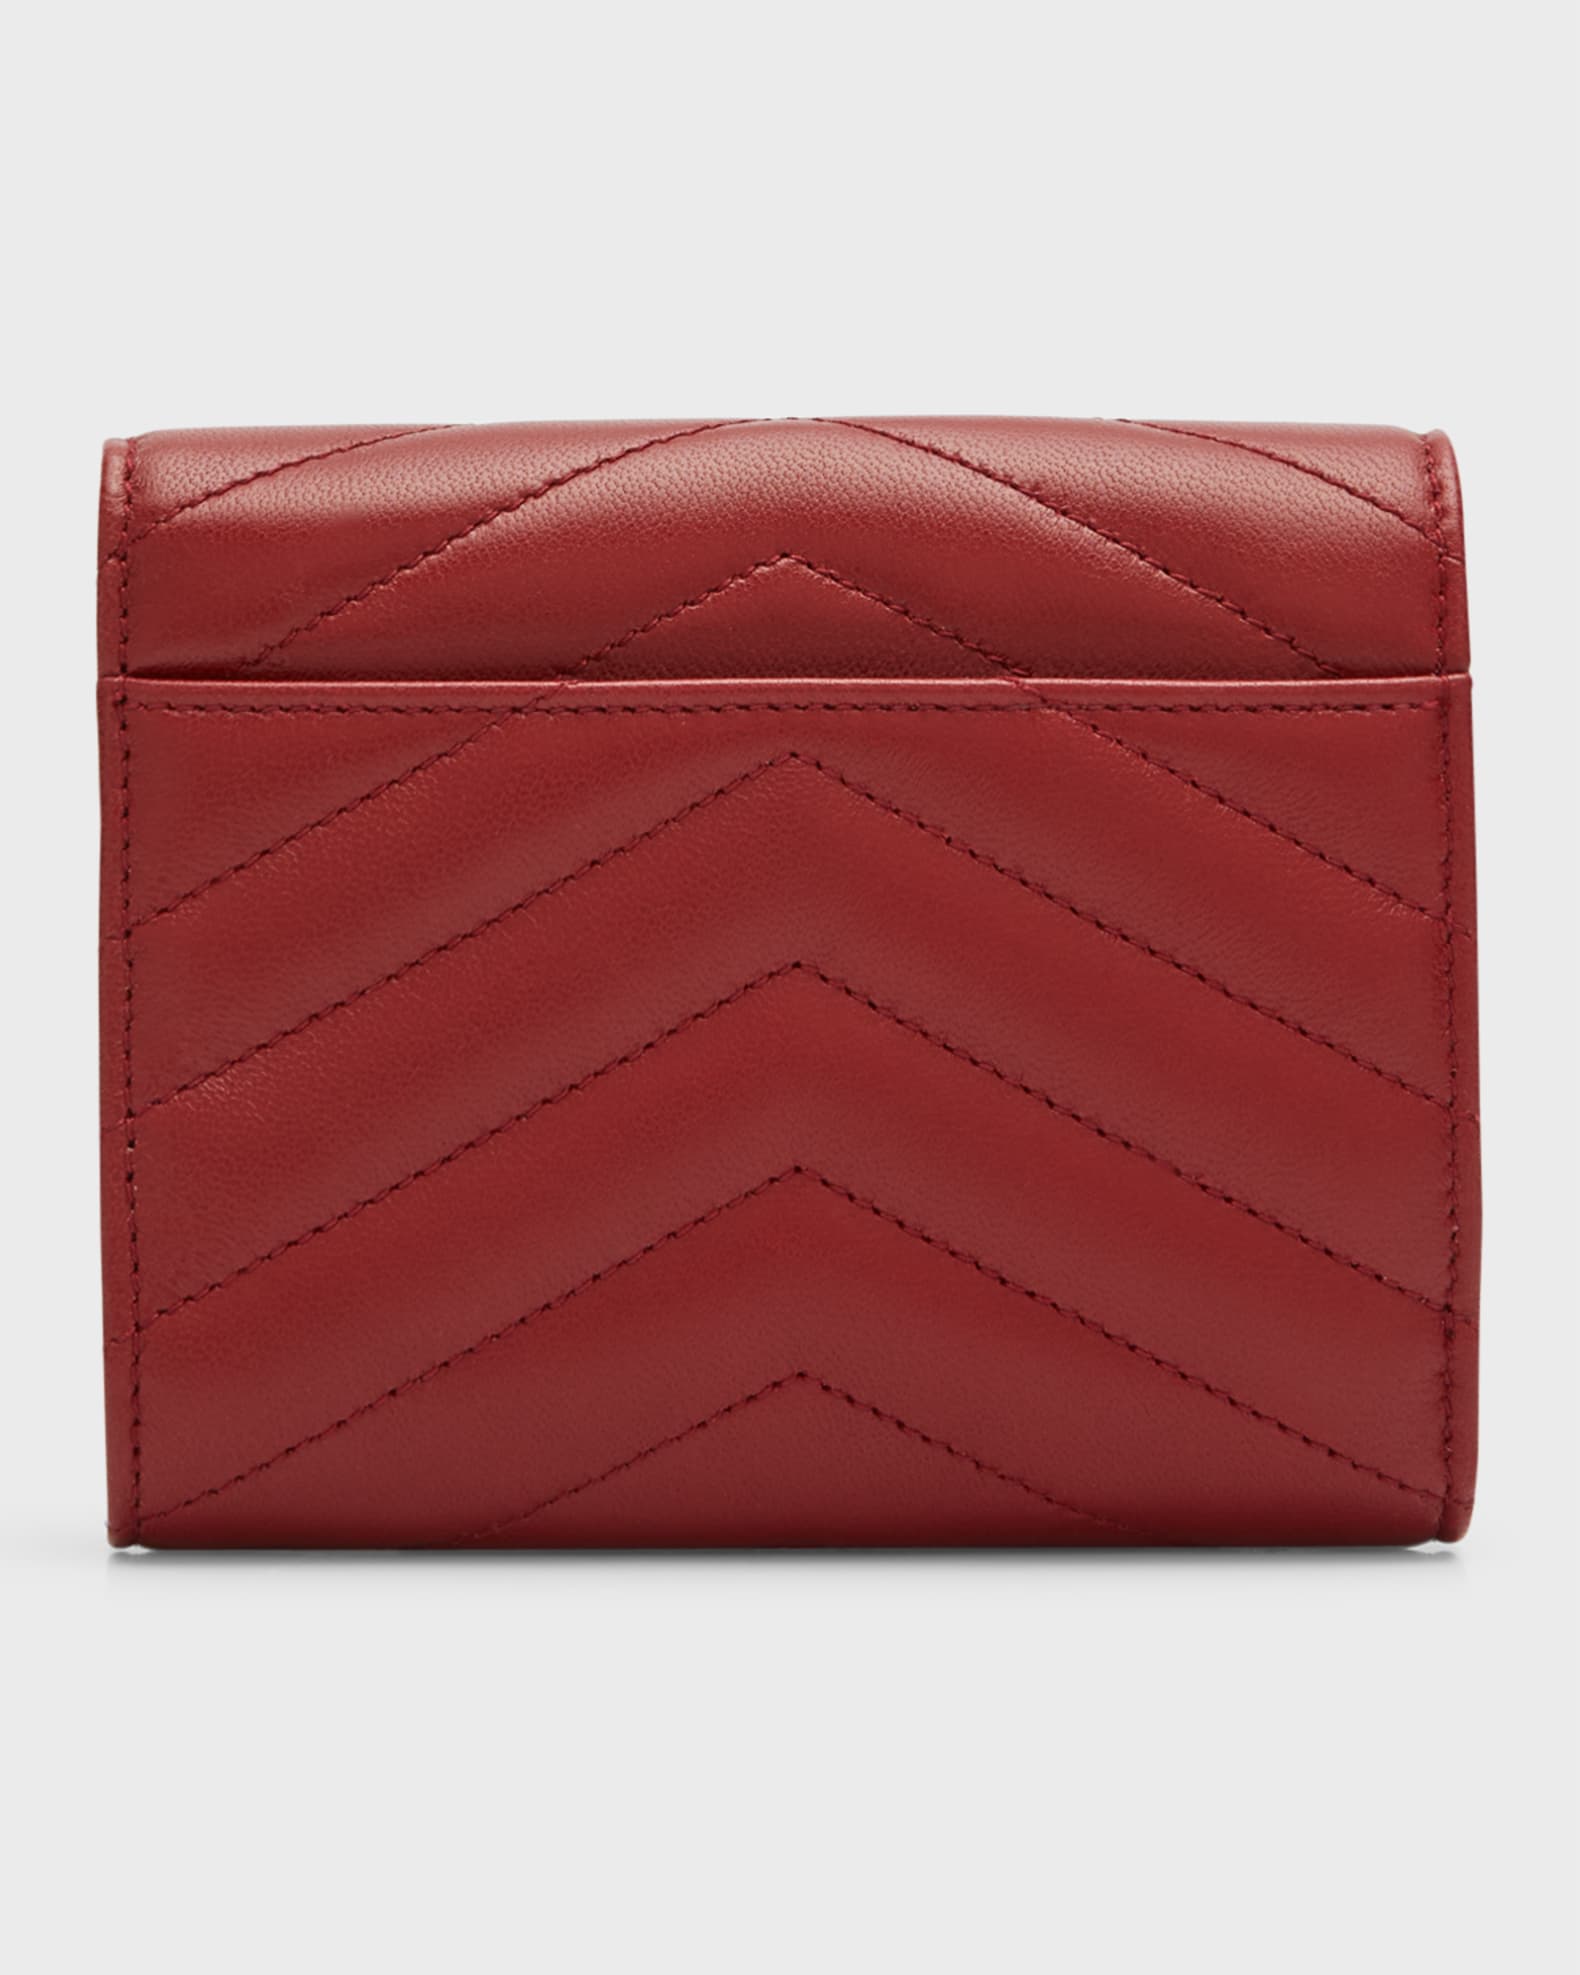 Saint Laurent YSL Quilted Nappa Leather Compact Tri-Fold Wallet